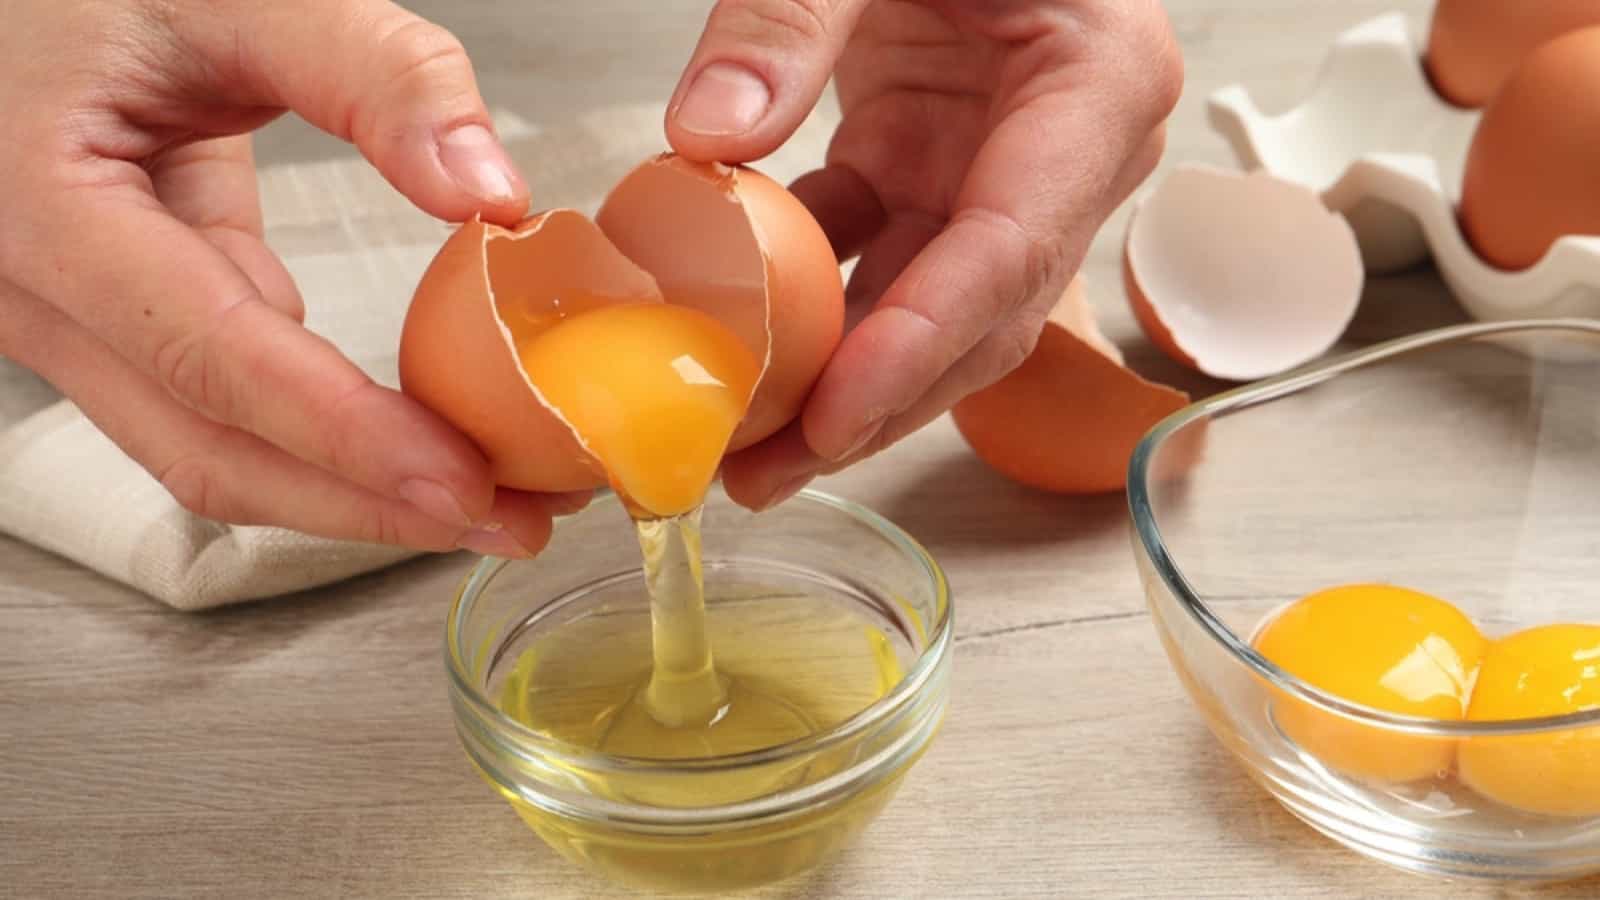 A person is putting eggs into a glass of oil.